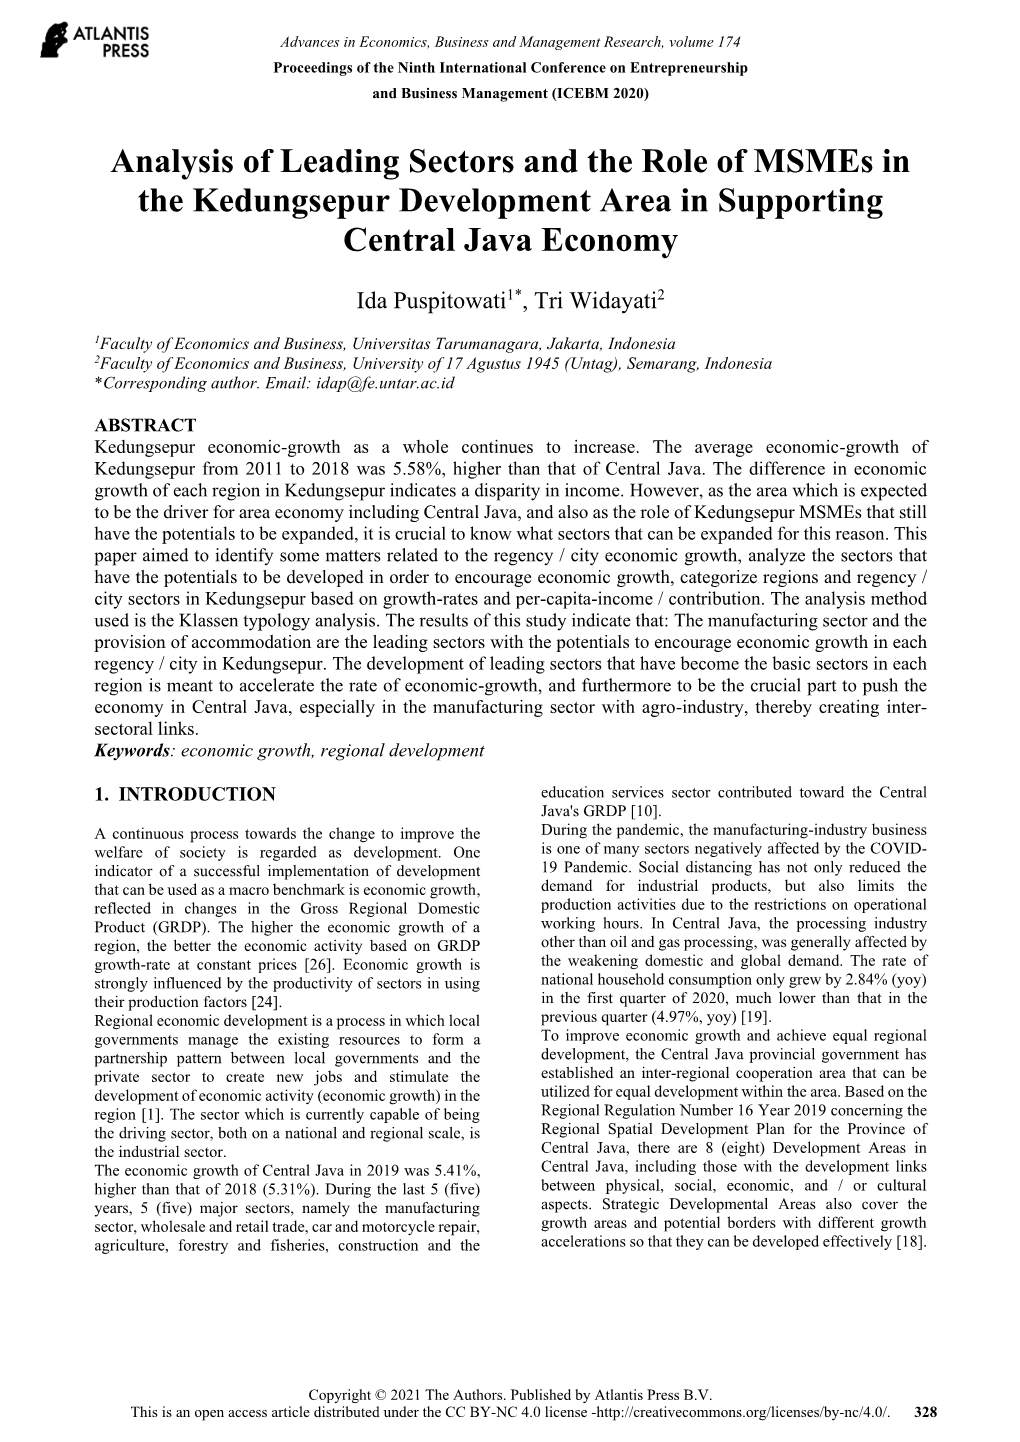 Analysis of Leading Sectors and the Role of Msmes in the Kedungsepur Development Area in Supporting Central Java Economy